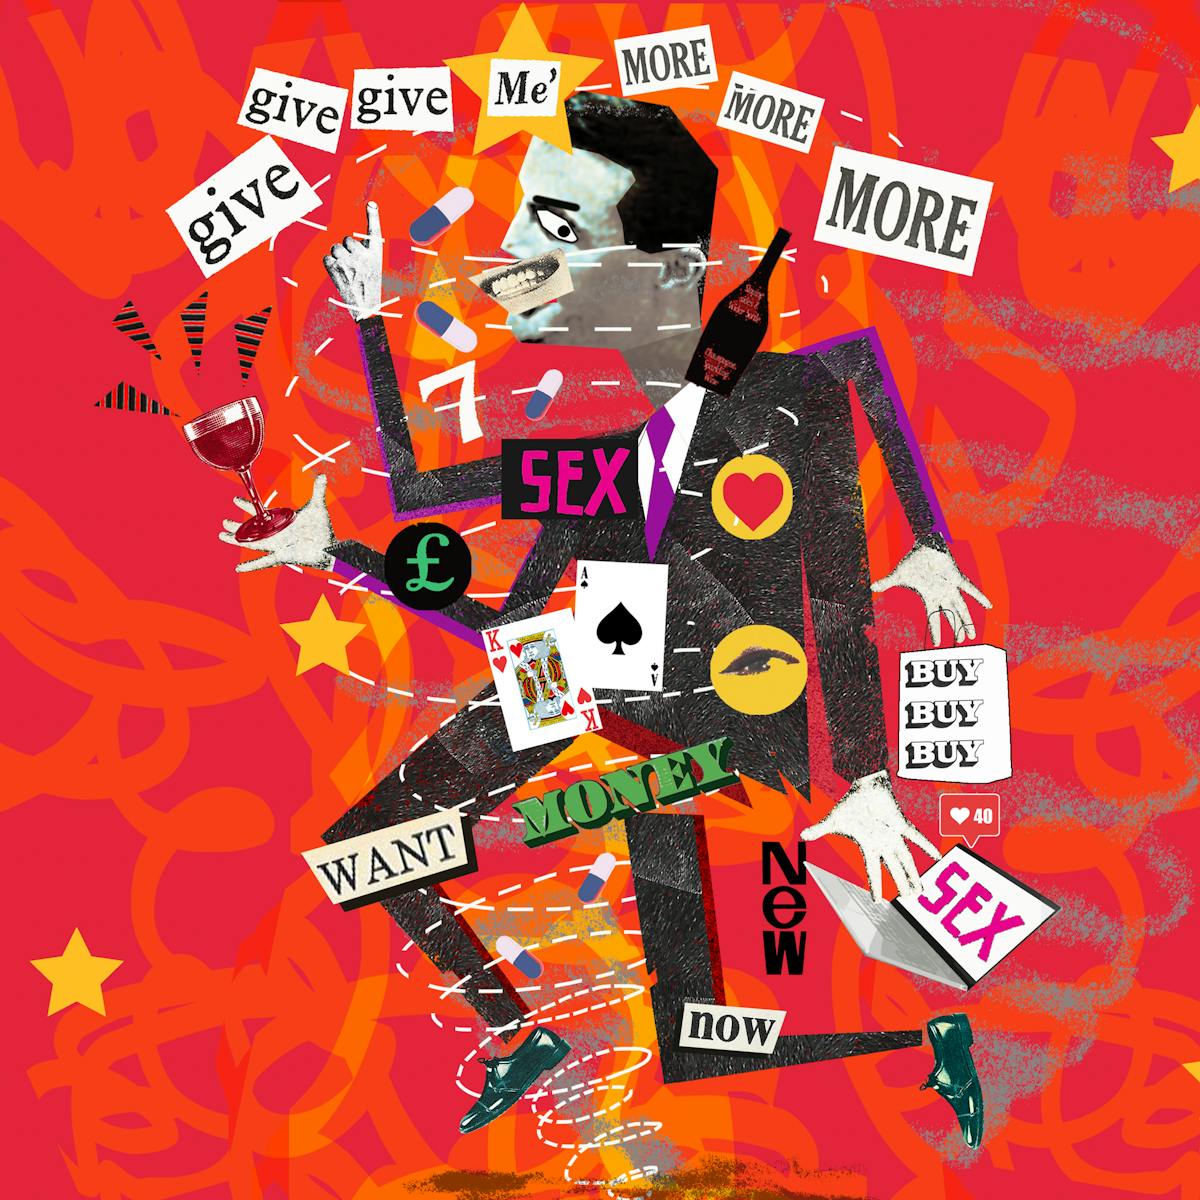 Illustration using a montage technique combining monotone photographs and colour graphics, showing a man with a crazed smile and hands and legs going in all directions. He is surrounded by wine glasses and bottles, palying cards and the words, give me more, want, money, now, buy, new, sex. Behind him against a red background are orange streamer and yellow stars. Either side of the frame are yellow and black hazard tape strips.